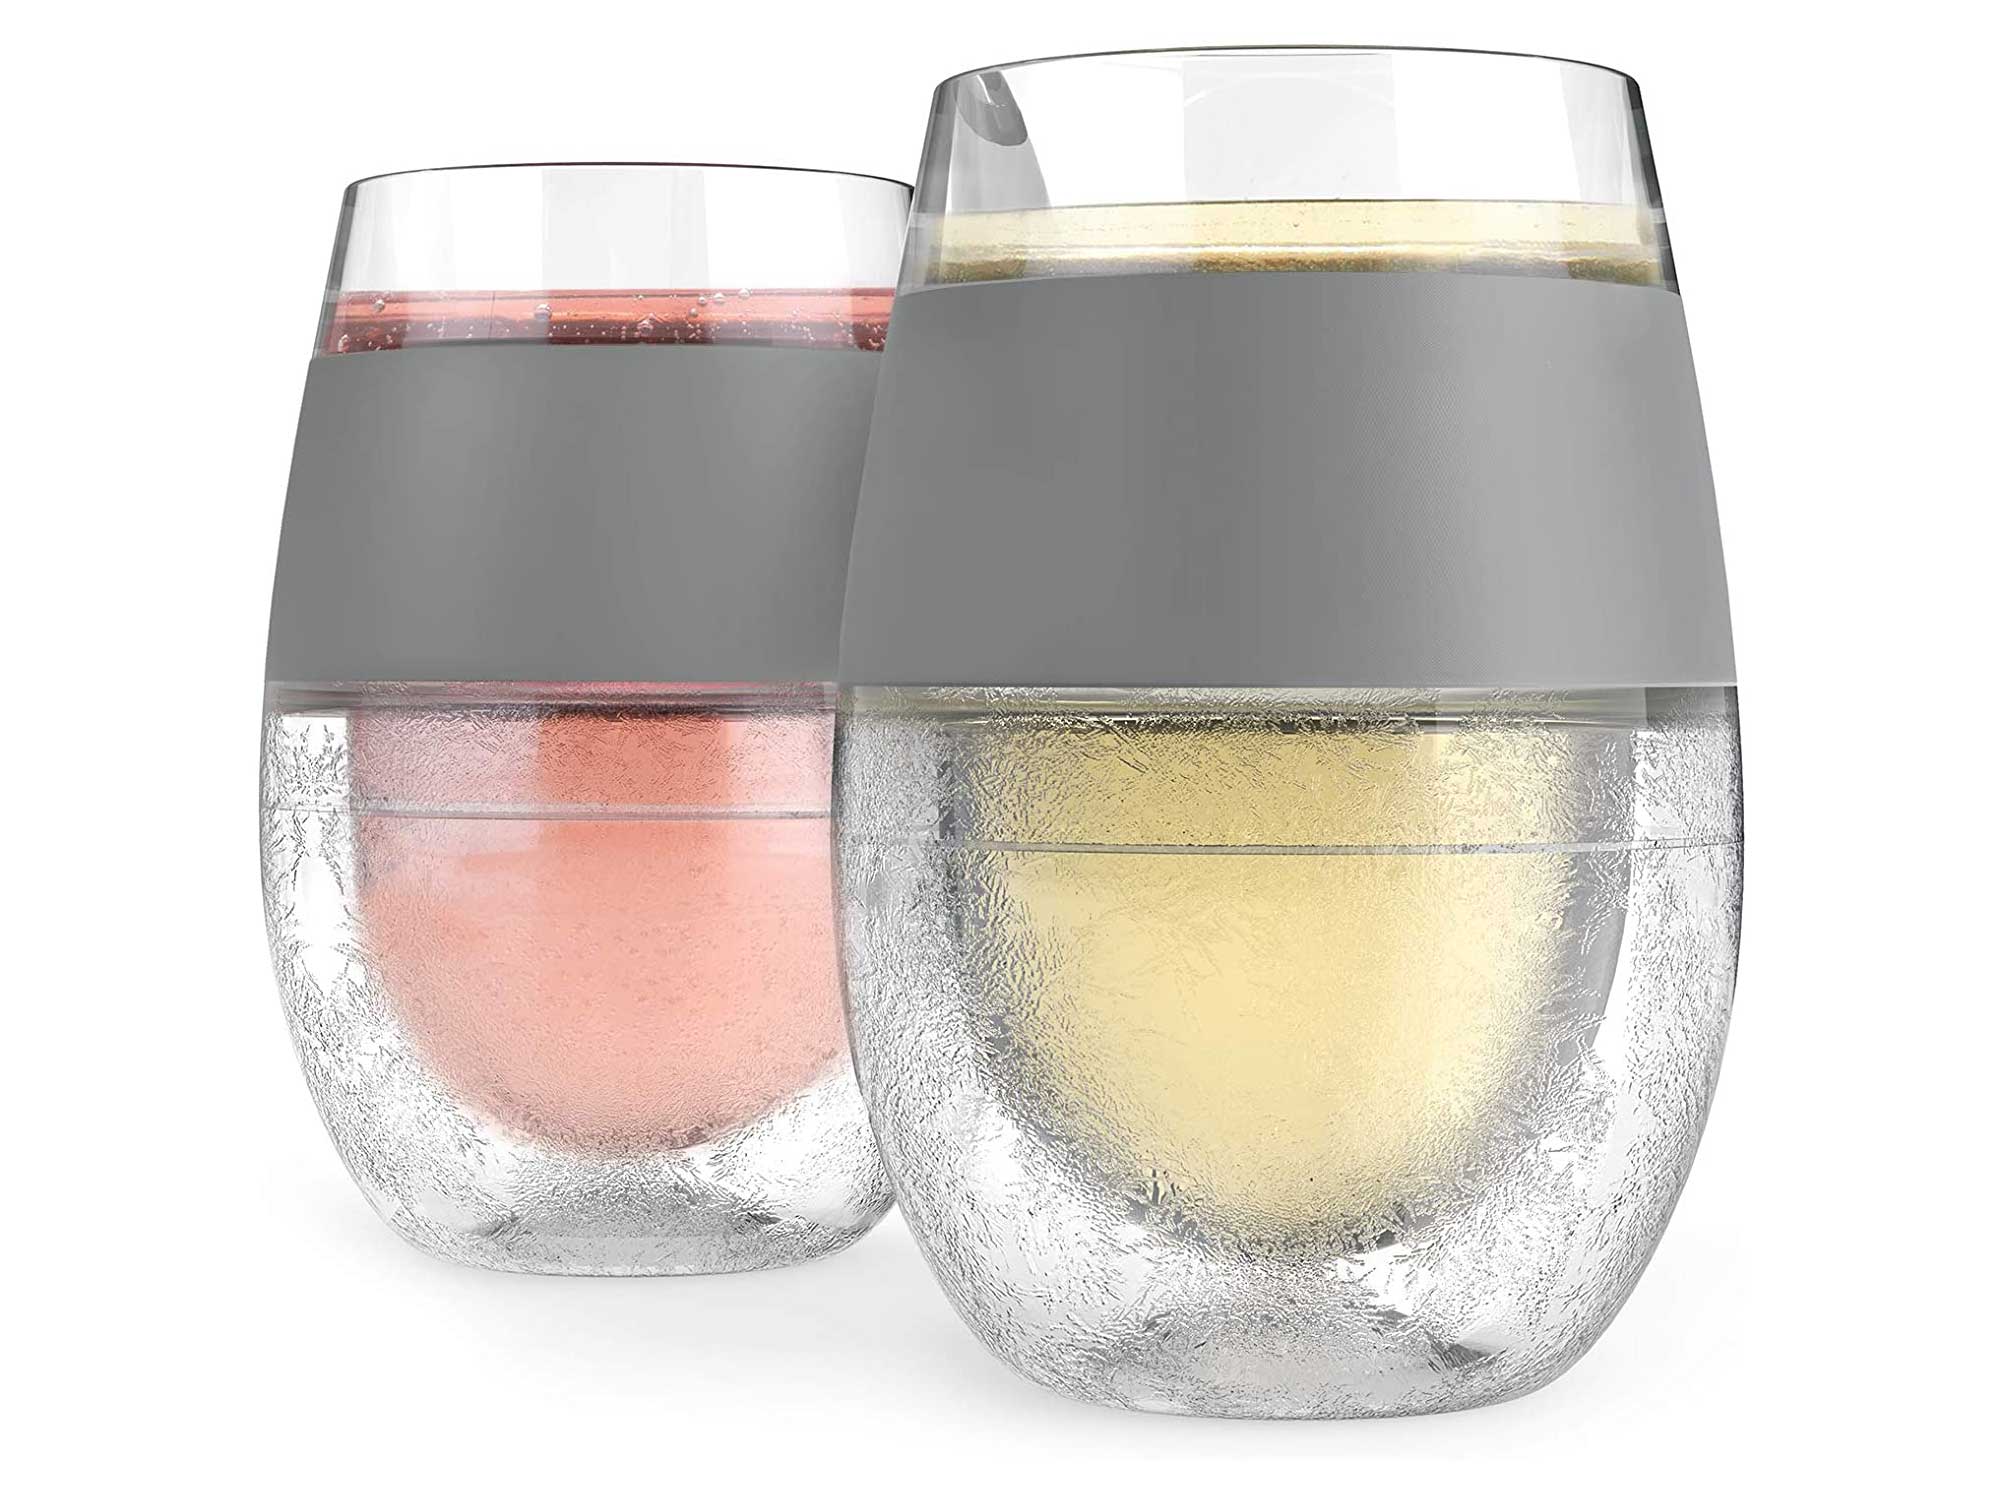 HOST Freeze Cooling Cup, Set of 2 Double Wall Insulated Freezer Chilling Tumbler with Gel, Glasses for Red and White Wine, 8.5 oz, Grey